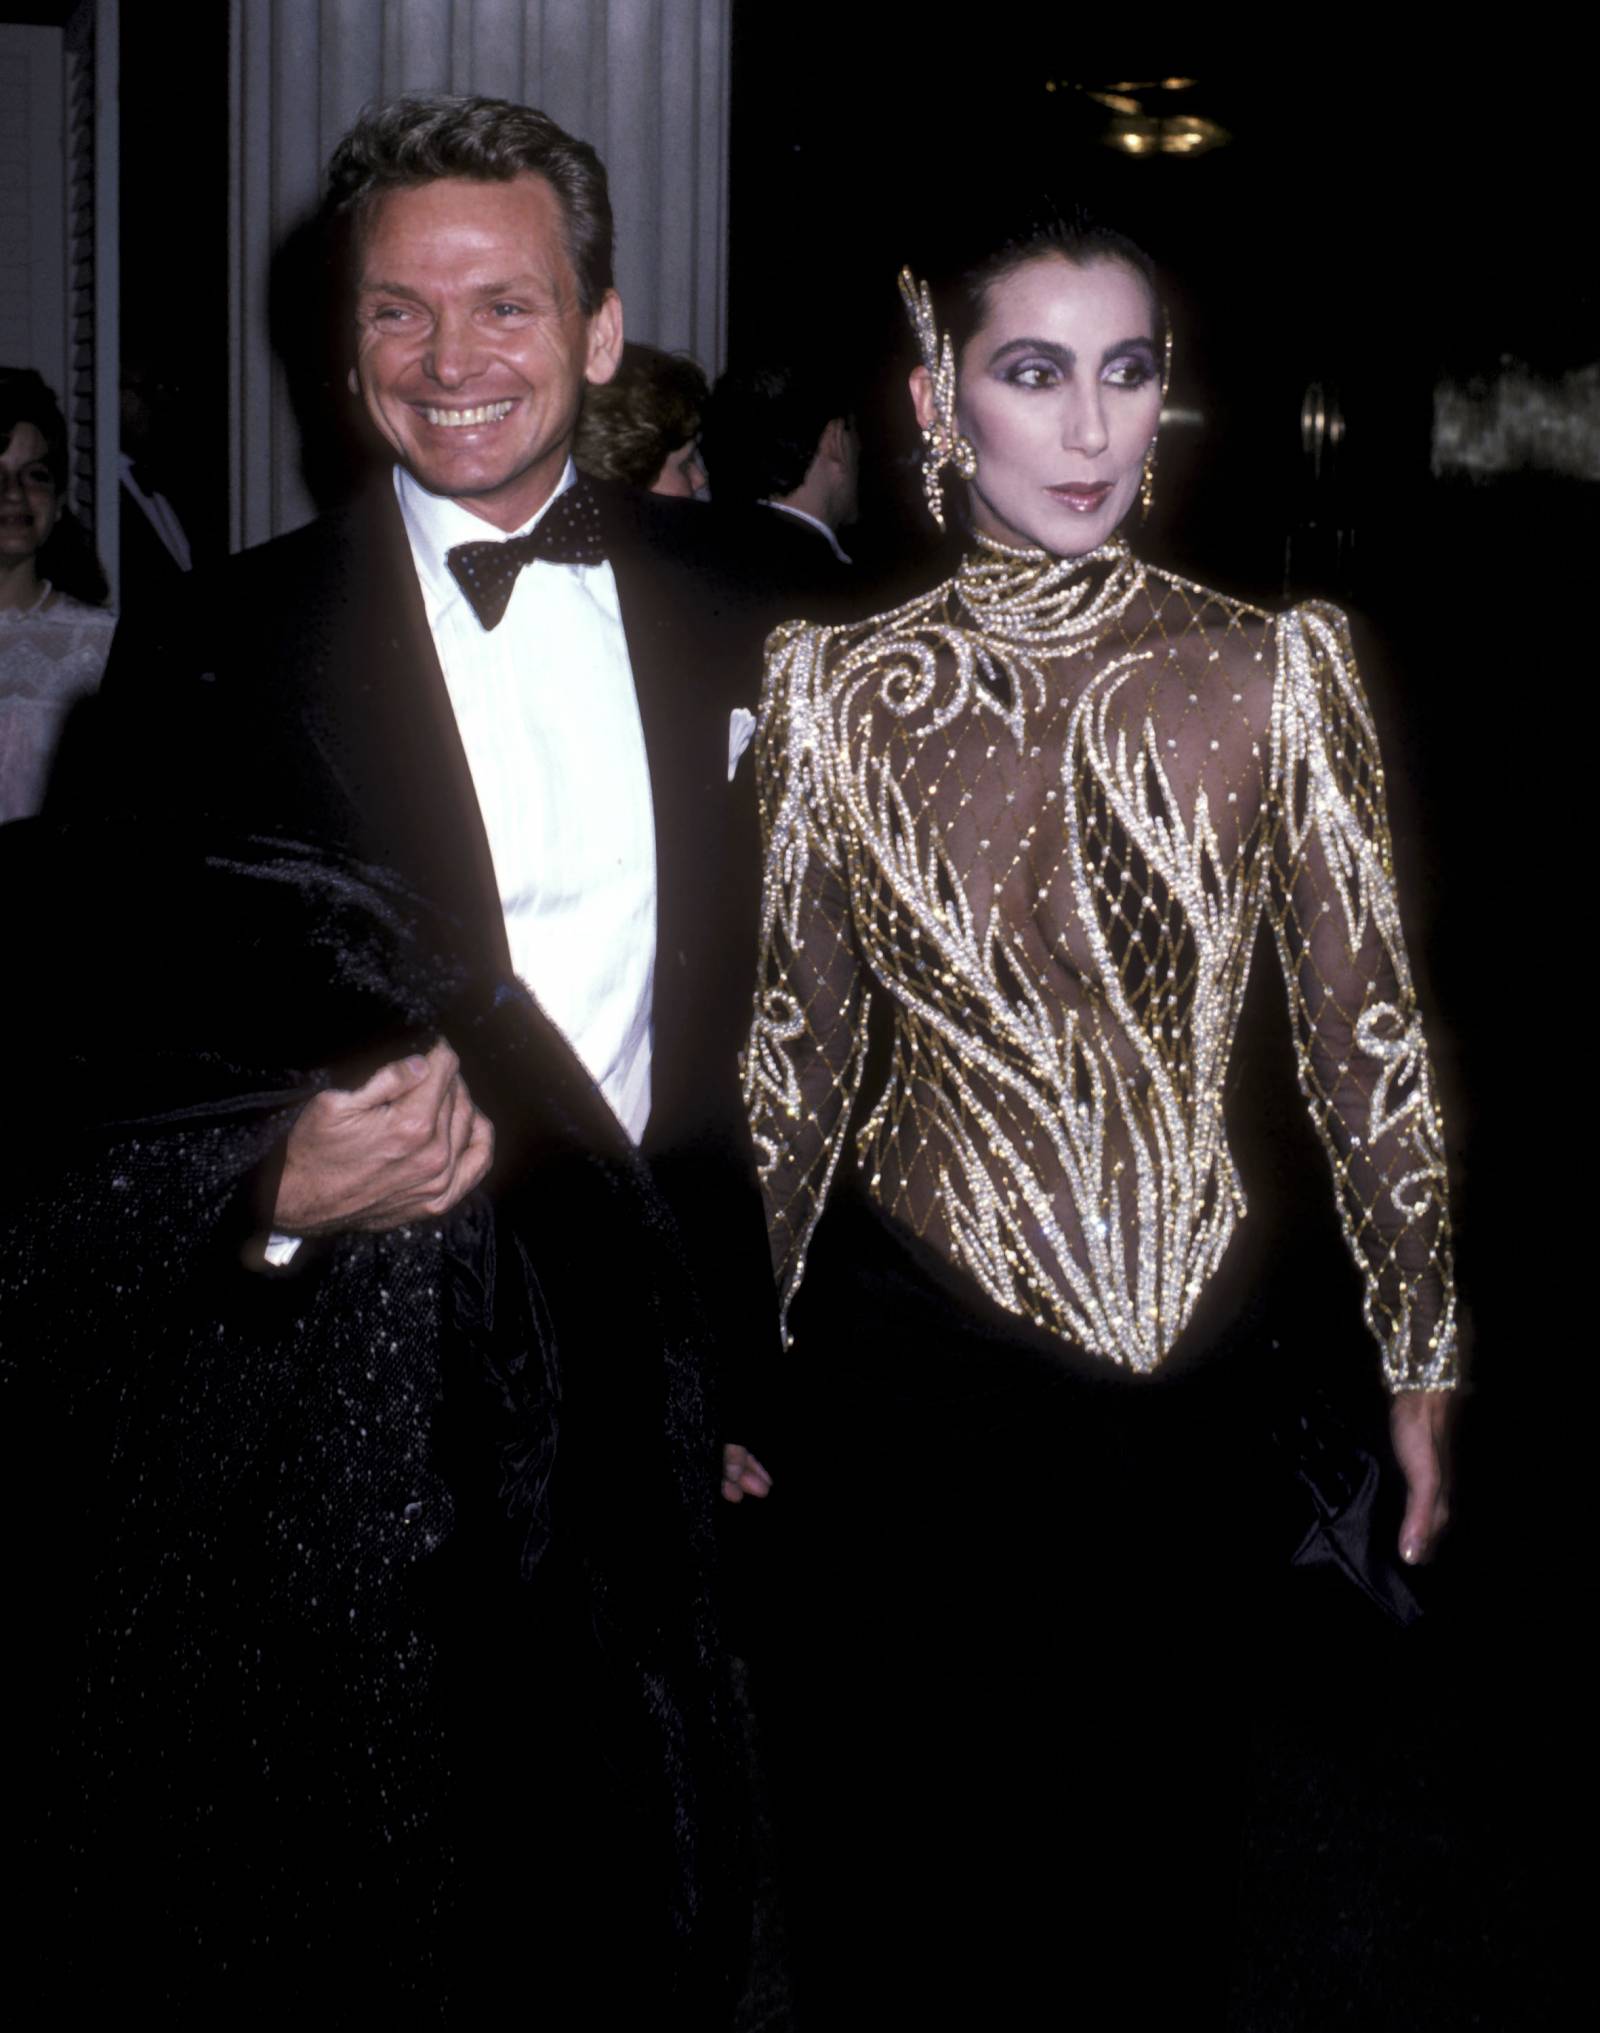 Z Cher na MET Gali 1985 /(Fot. Getty Images)